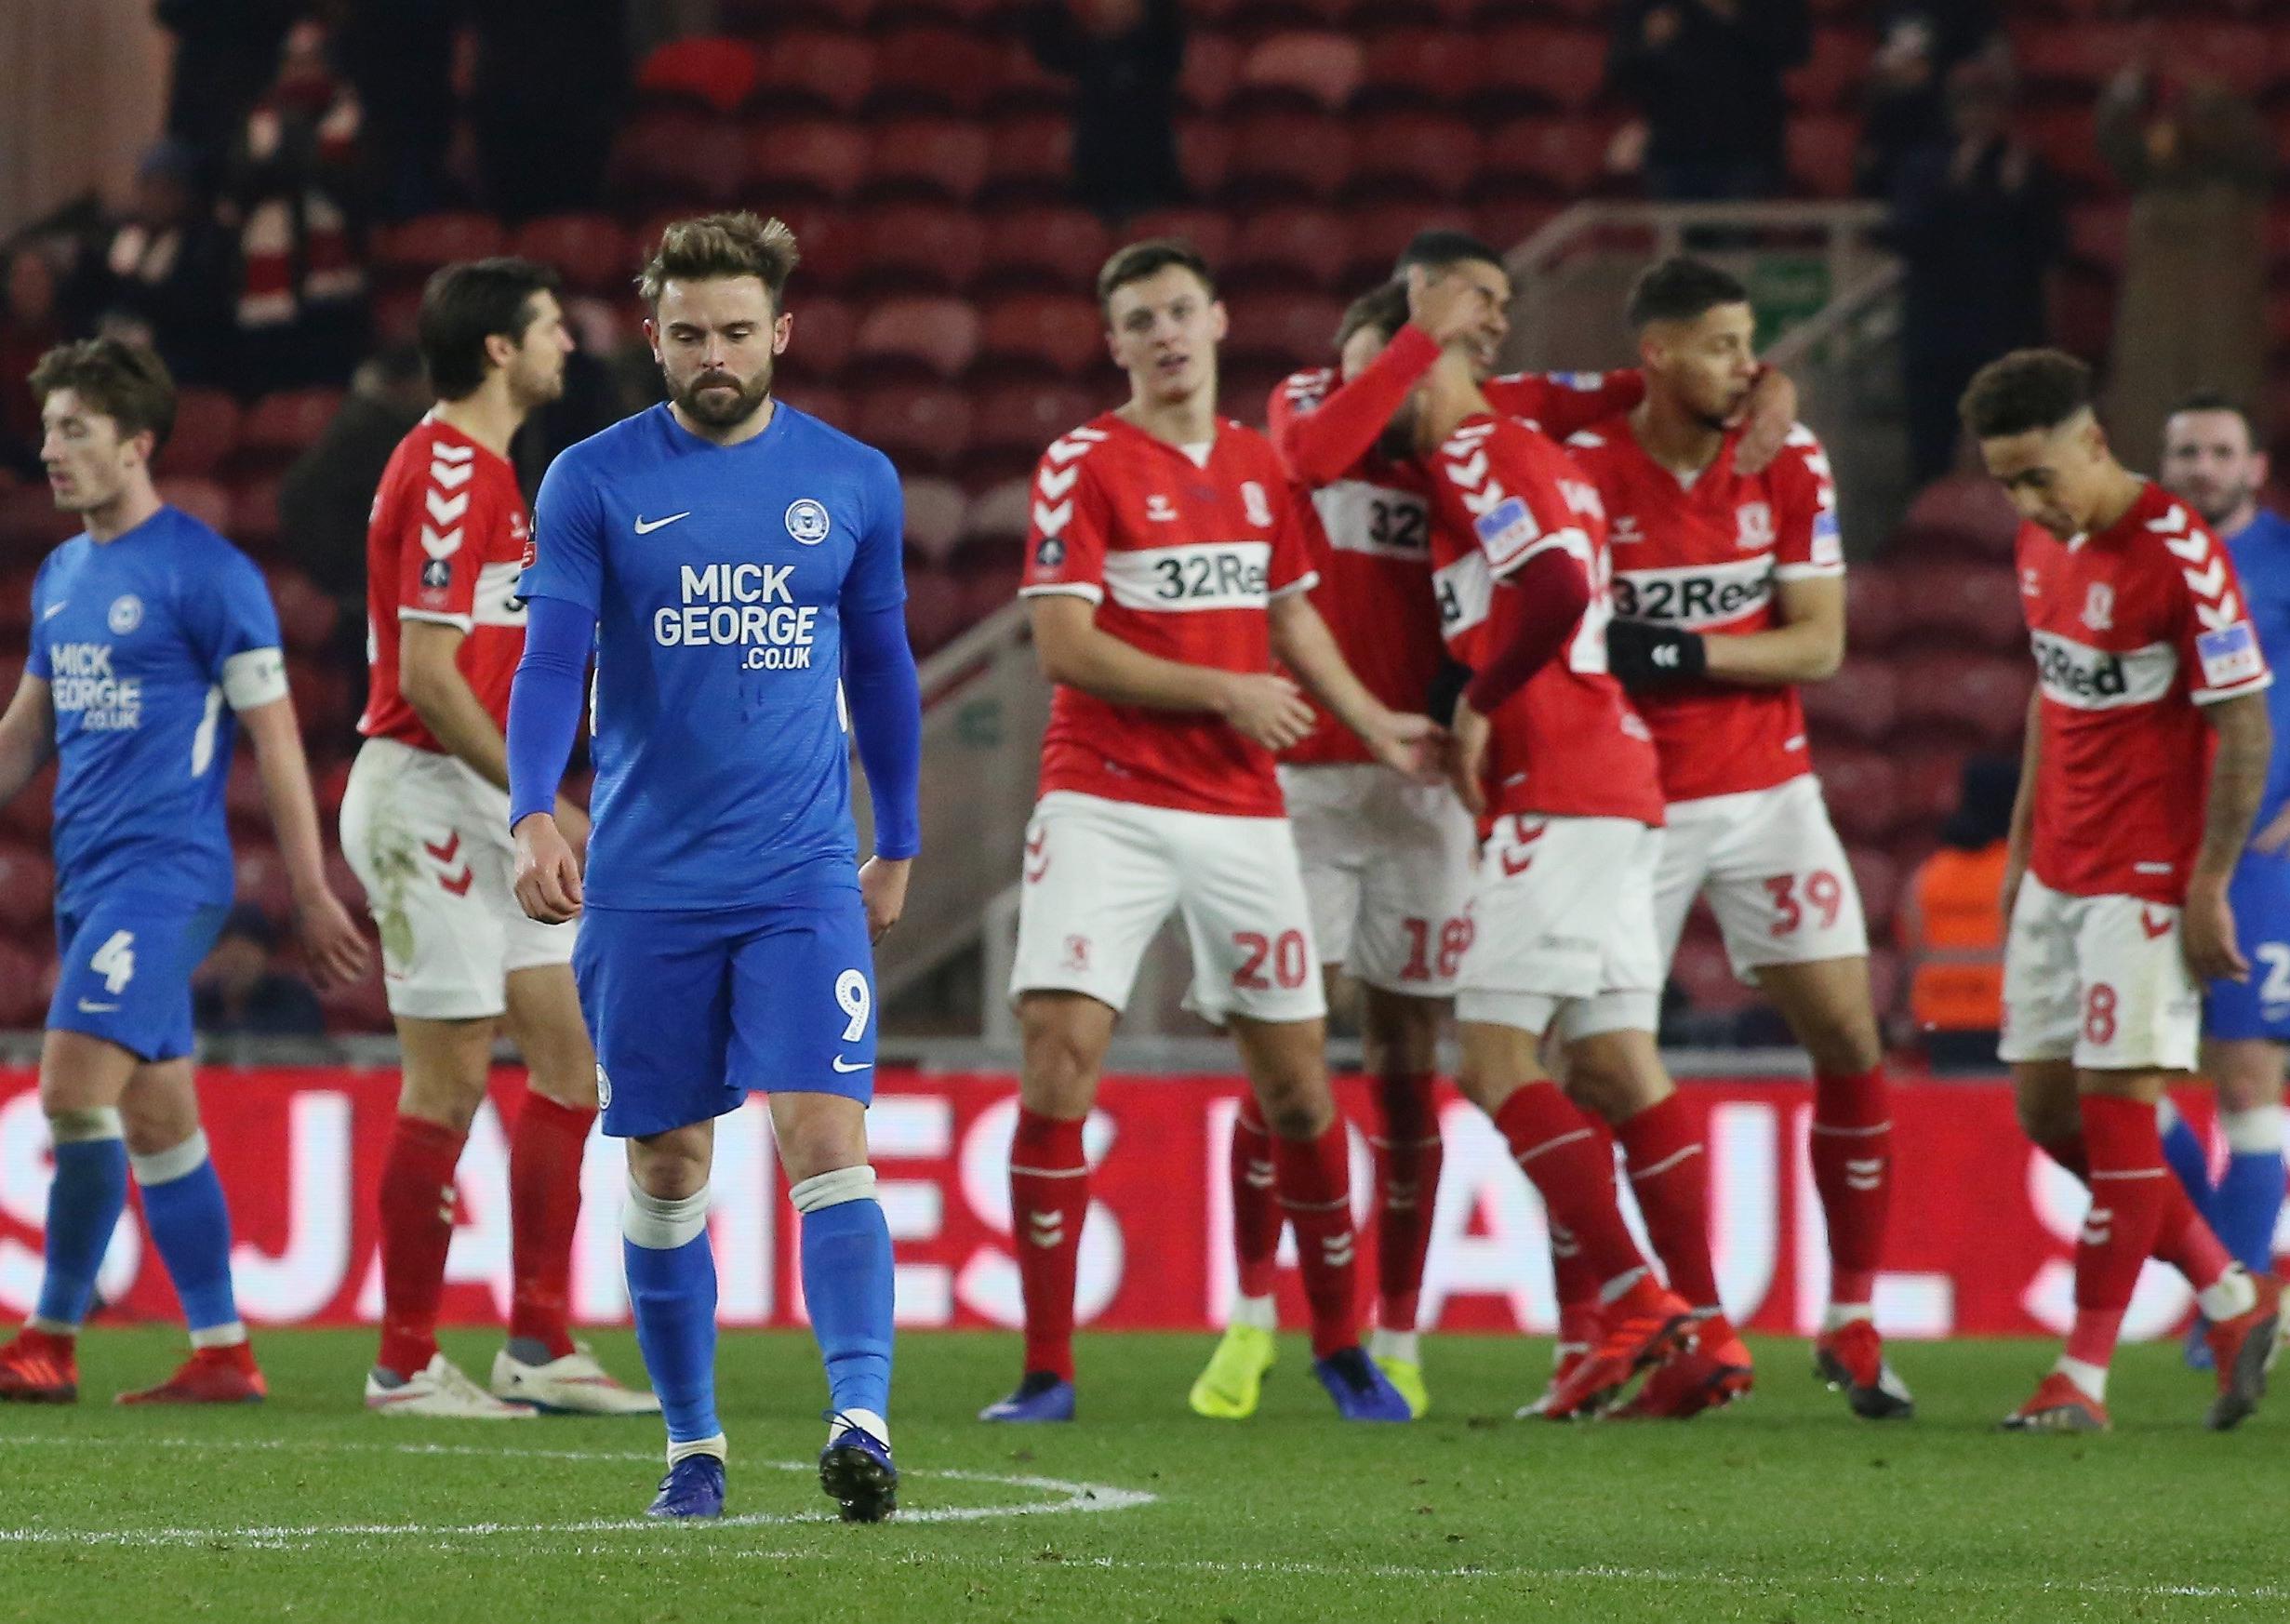 The heaviest defeat was 5-0 in a third round FA Cup tie at Middlesbrough in January. There were two four-goal beatings at Luton, also in January, and at Rotherham in the final game of the year.